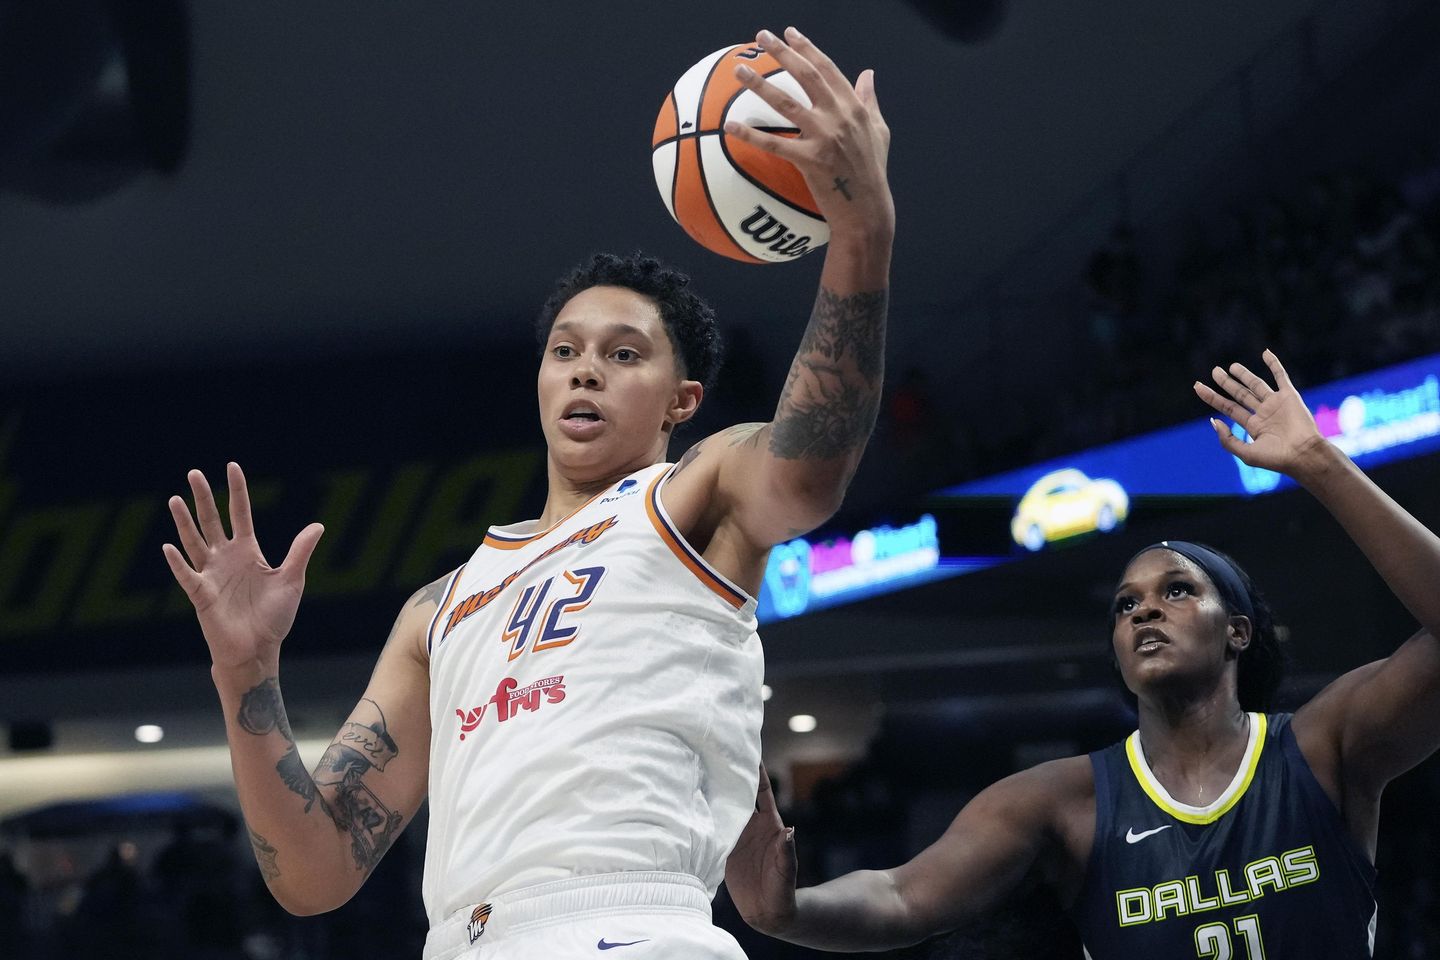 Mercury make travel 'adjustments' following airport incident with Griner